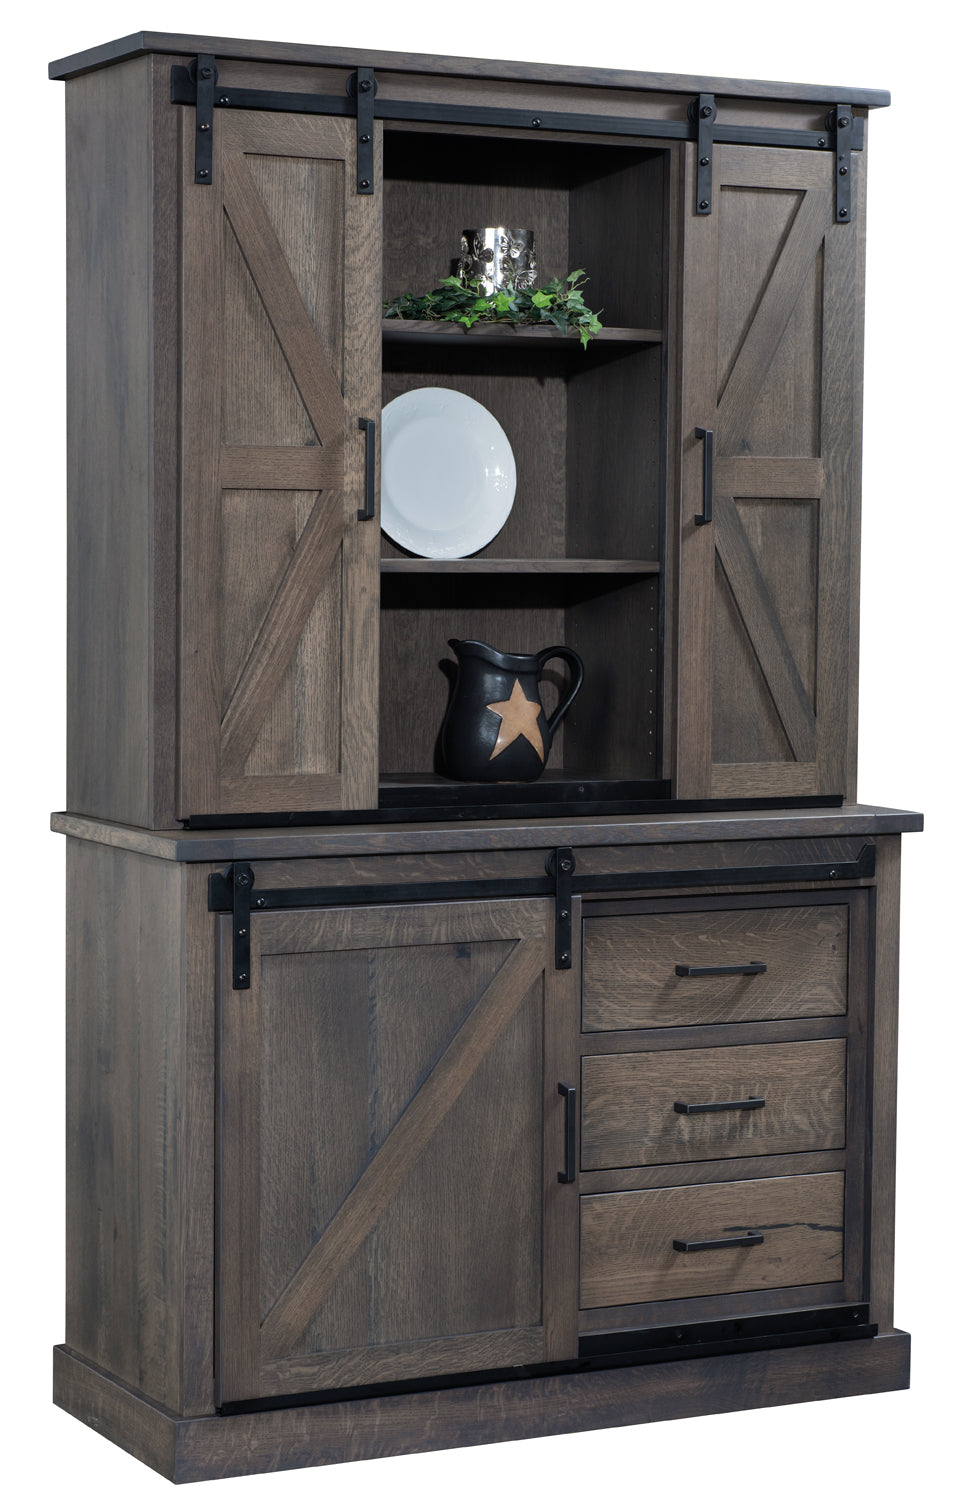 Amish Country Cottage 50" Hutch